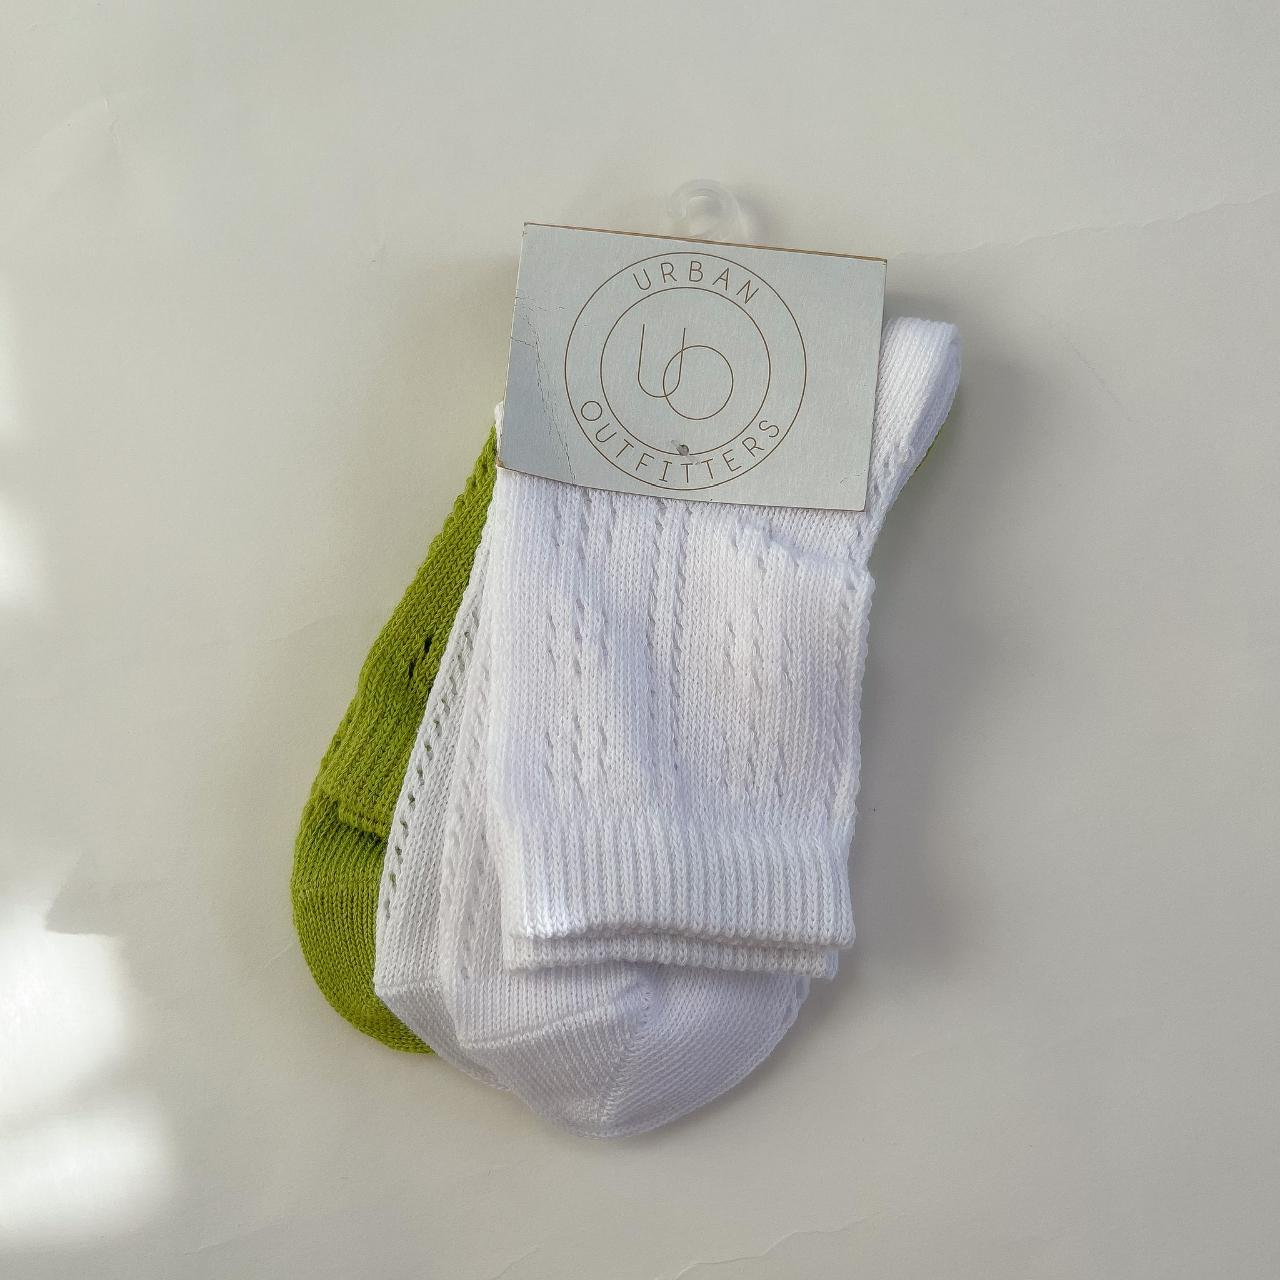 Urban Outfitters Women's Green and White Socks | Depop